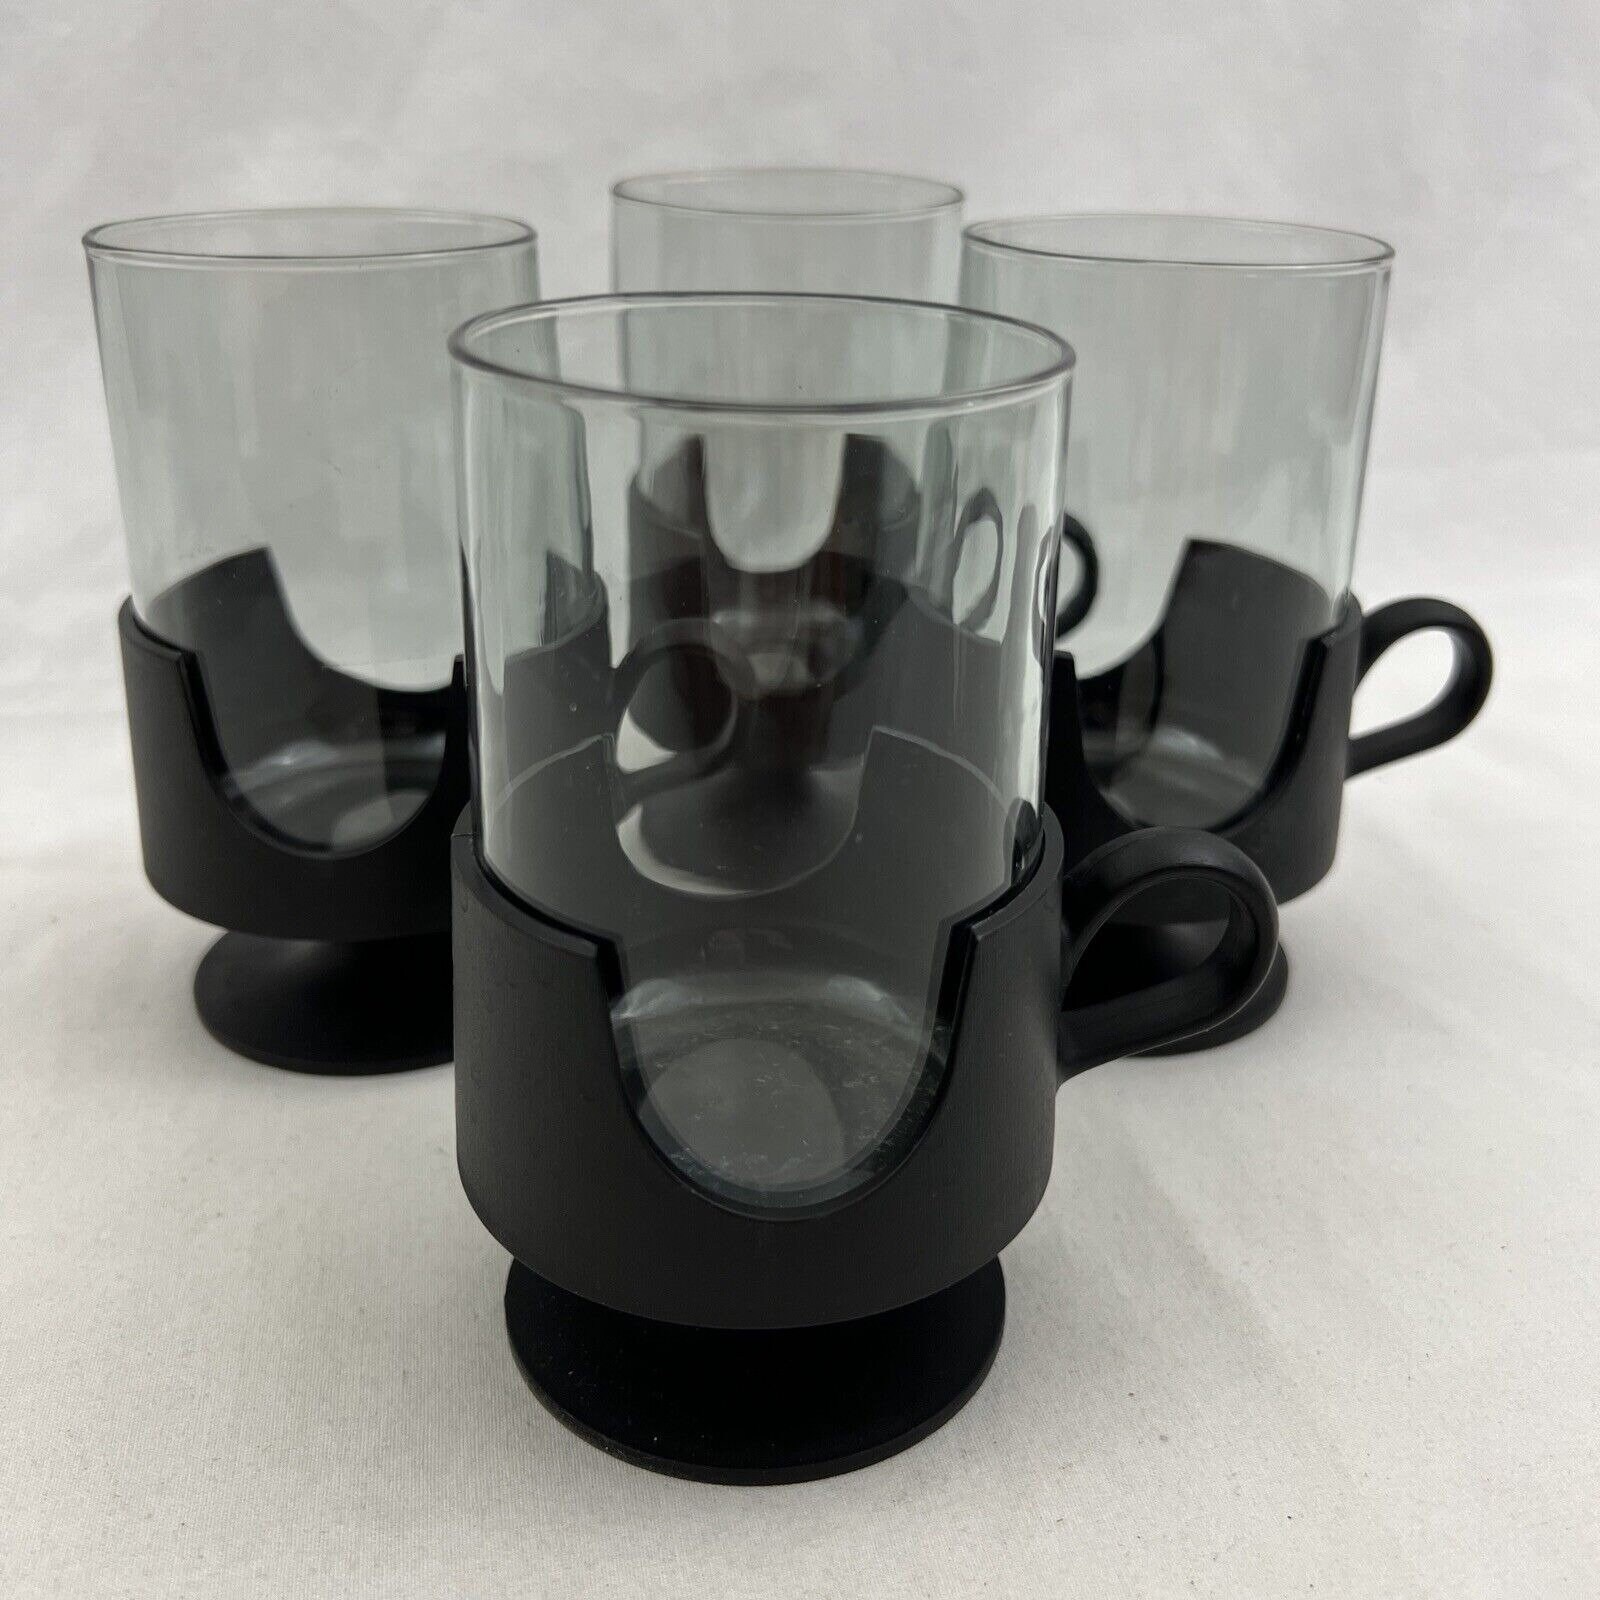 1970's Glas-Snap by Corning Two Piece Pedestal Glassware, Set of